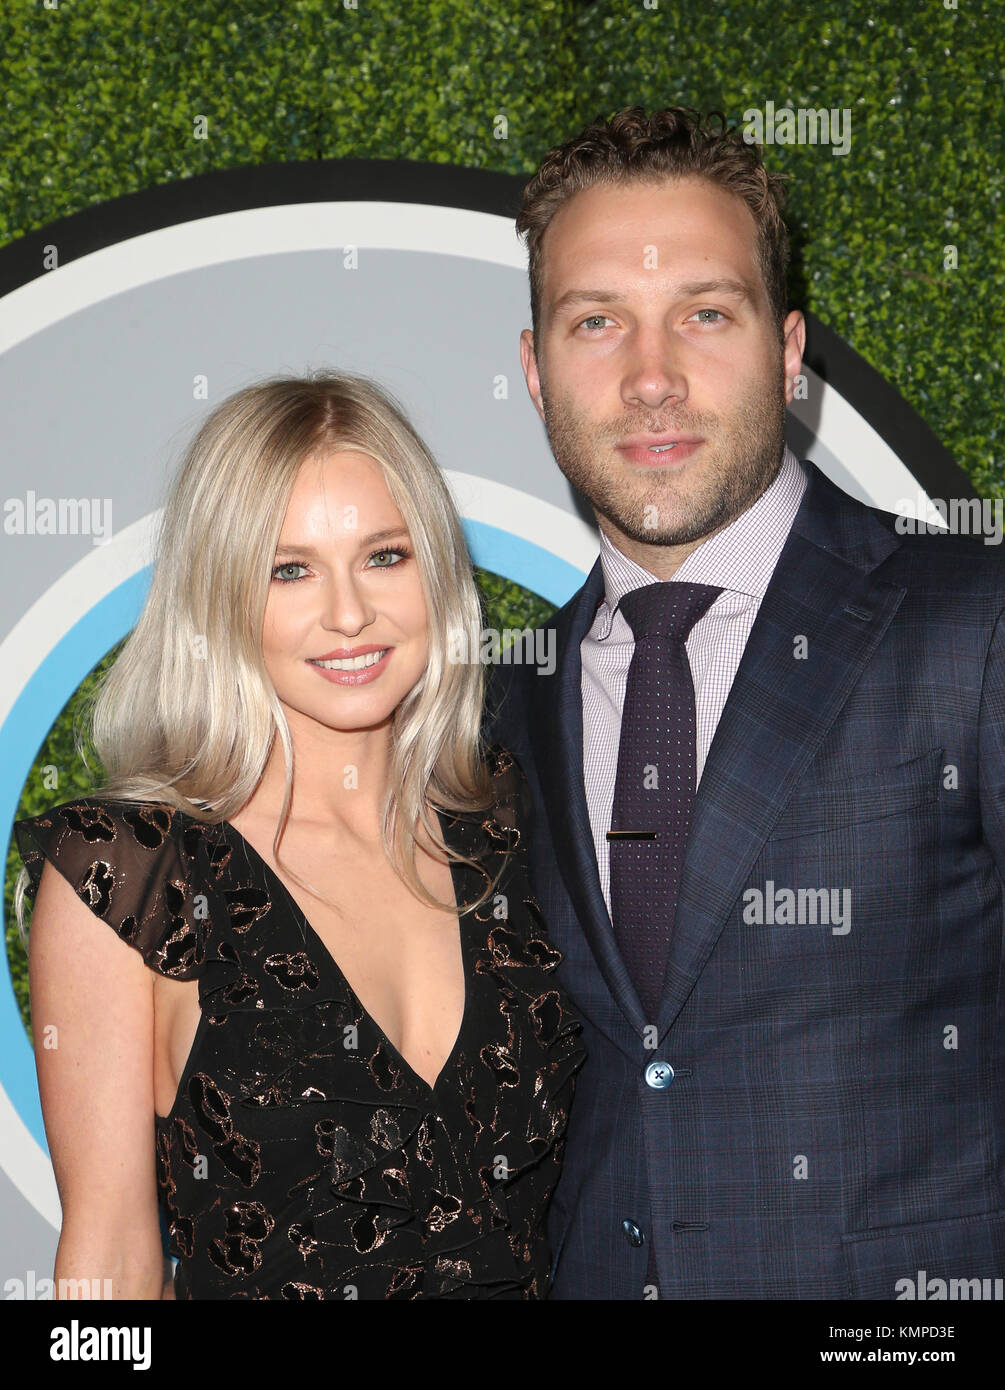 Los ANGELES, CA - 7 DICEMBRE: Jai Courtney, Mecki Dent, at 2017 GQ Men Of The Year Party at Chateau Marmont a Los Angeles, California, il 7 dicembre 2017. Credito: Faye Sadou/Mediapunch Foto Stock